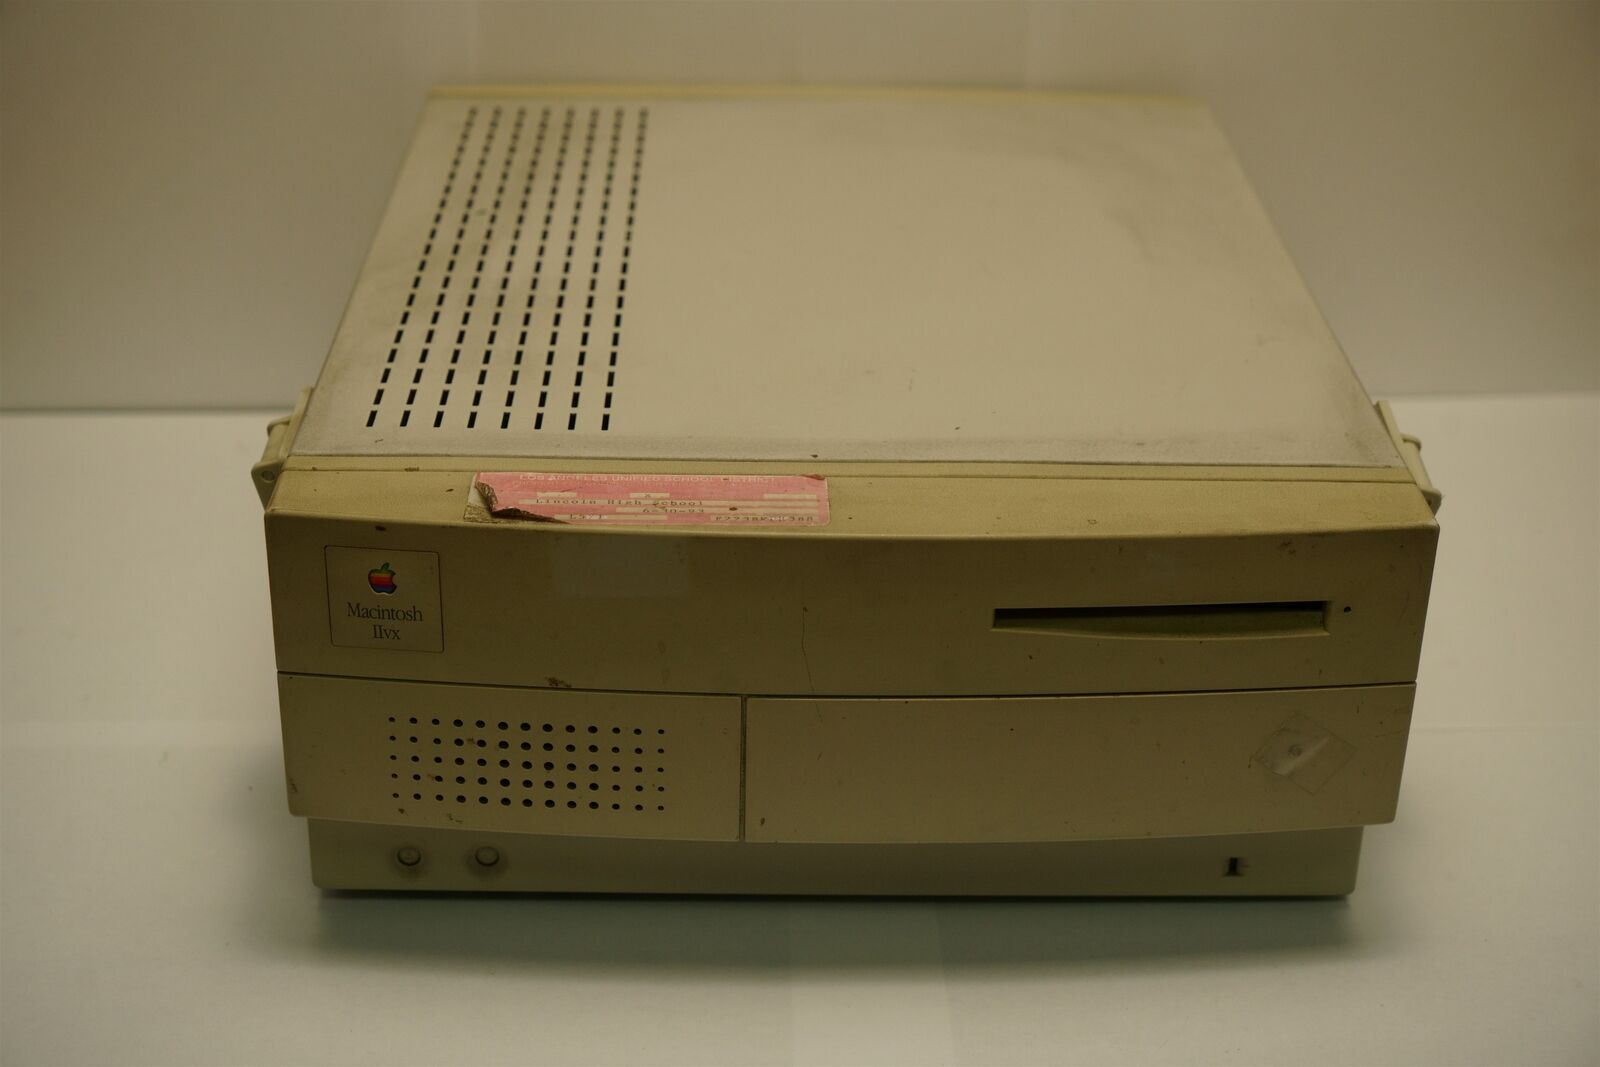 Apple Macintosh IIvx M1350 - Running and Tested - No HDD 